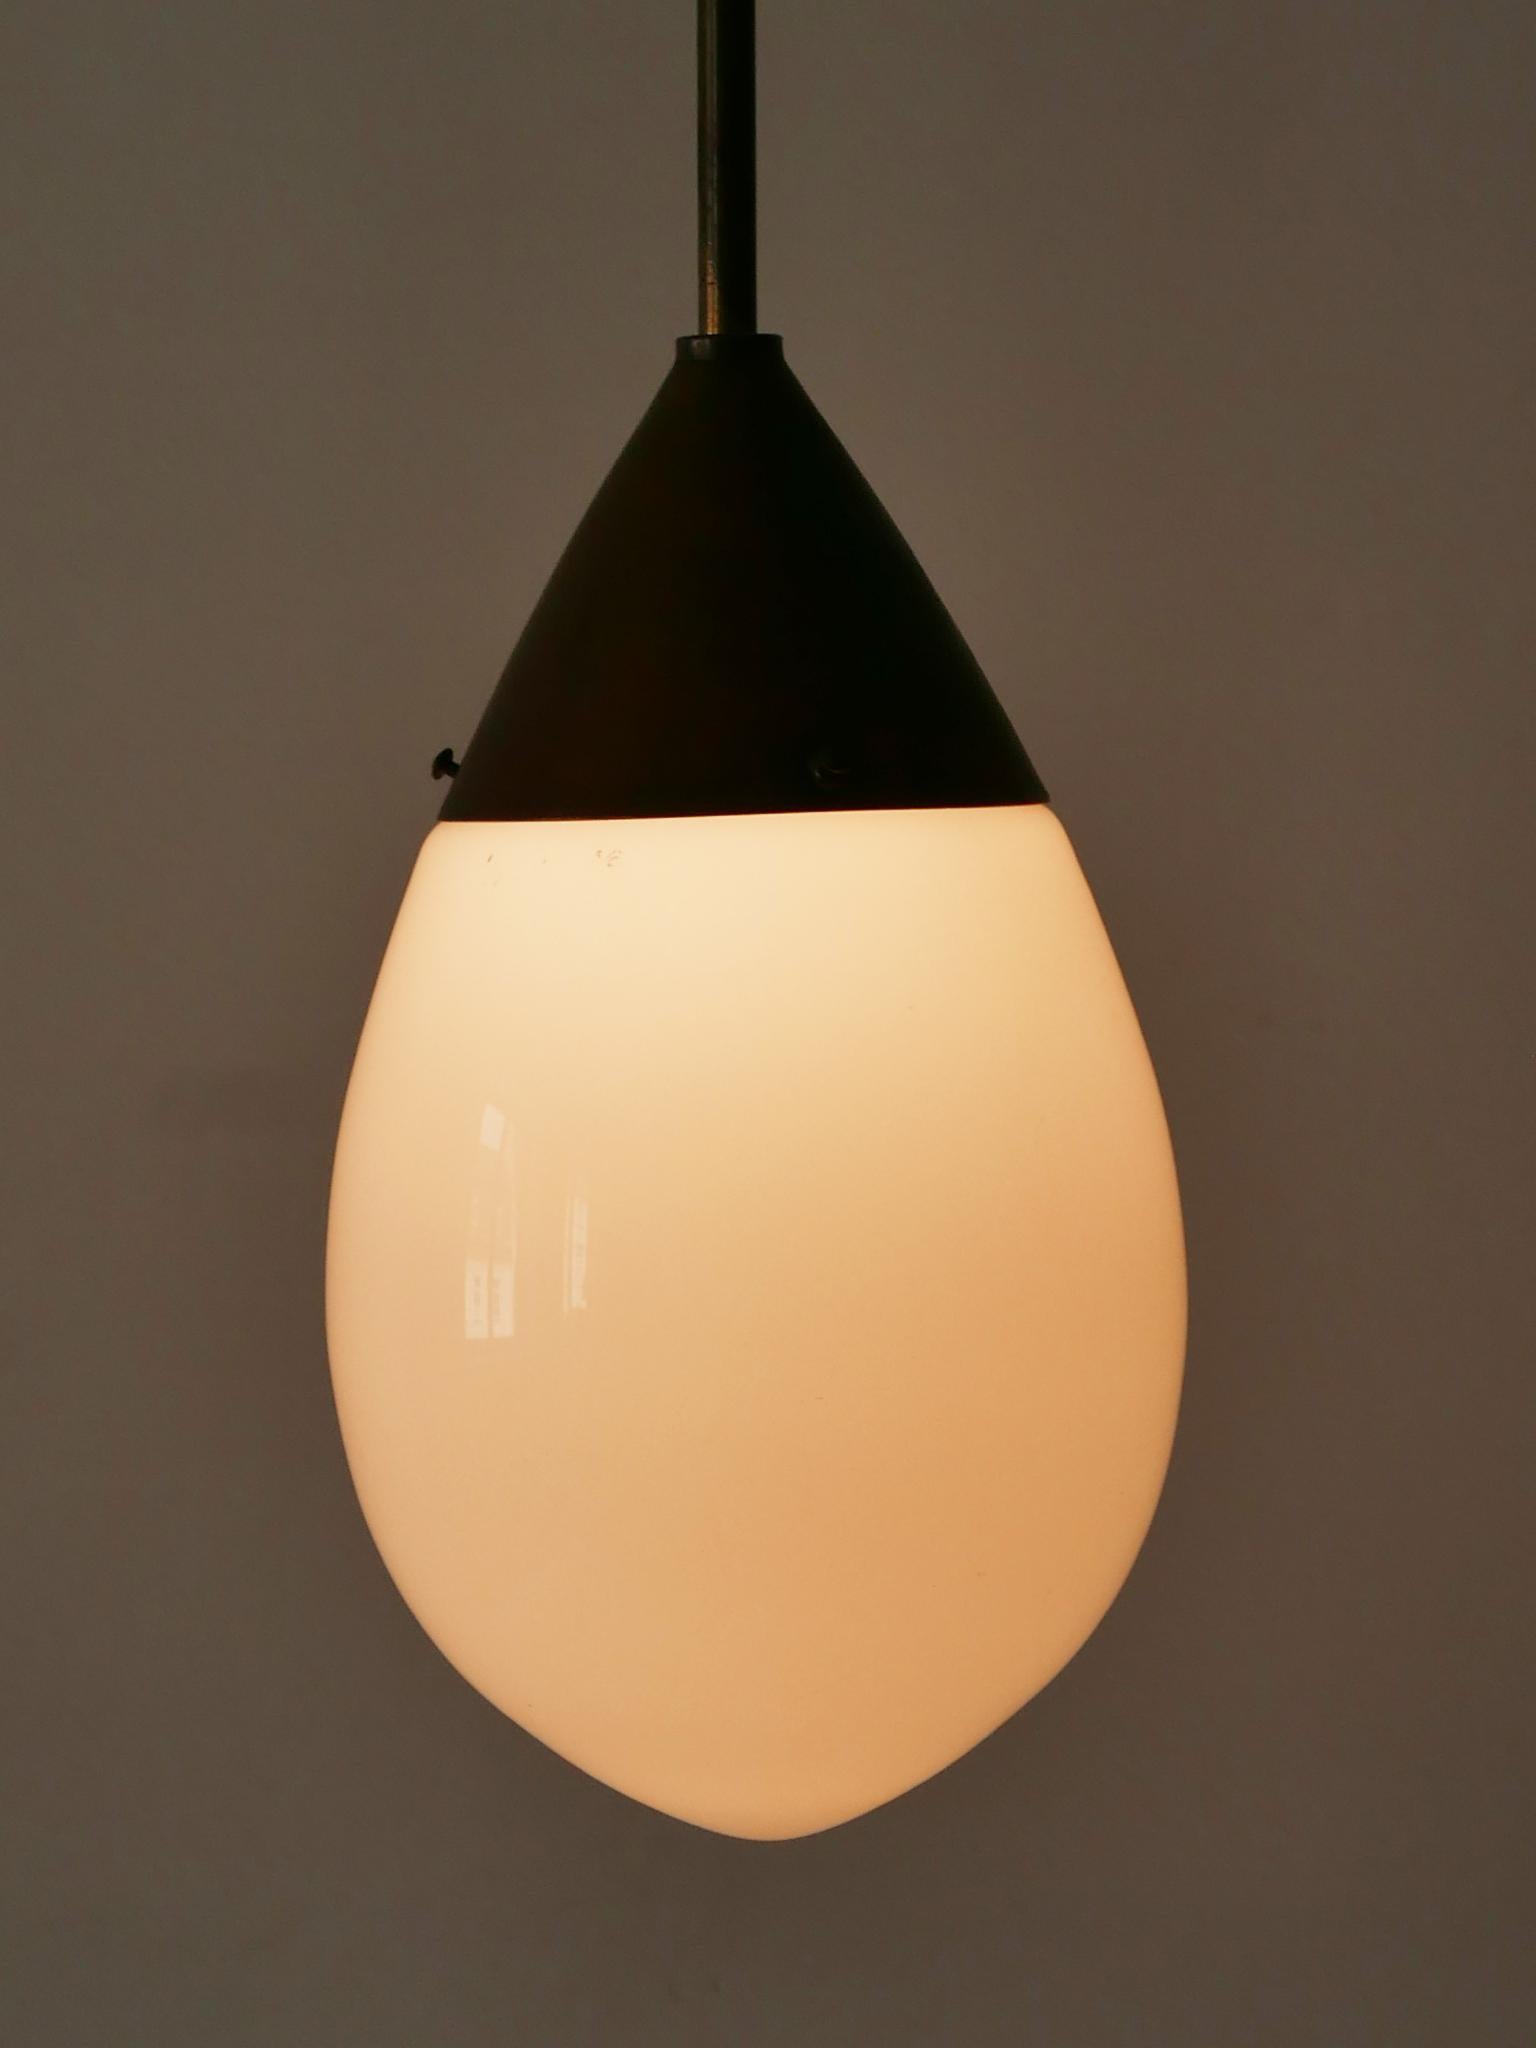 Exceptional Bauhaus Pendant Lamp or Hanging Light Drop by Siemens 1920s, Germany In Good Condition For Sale In Munich, DE